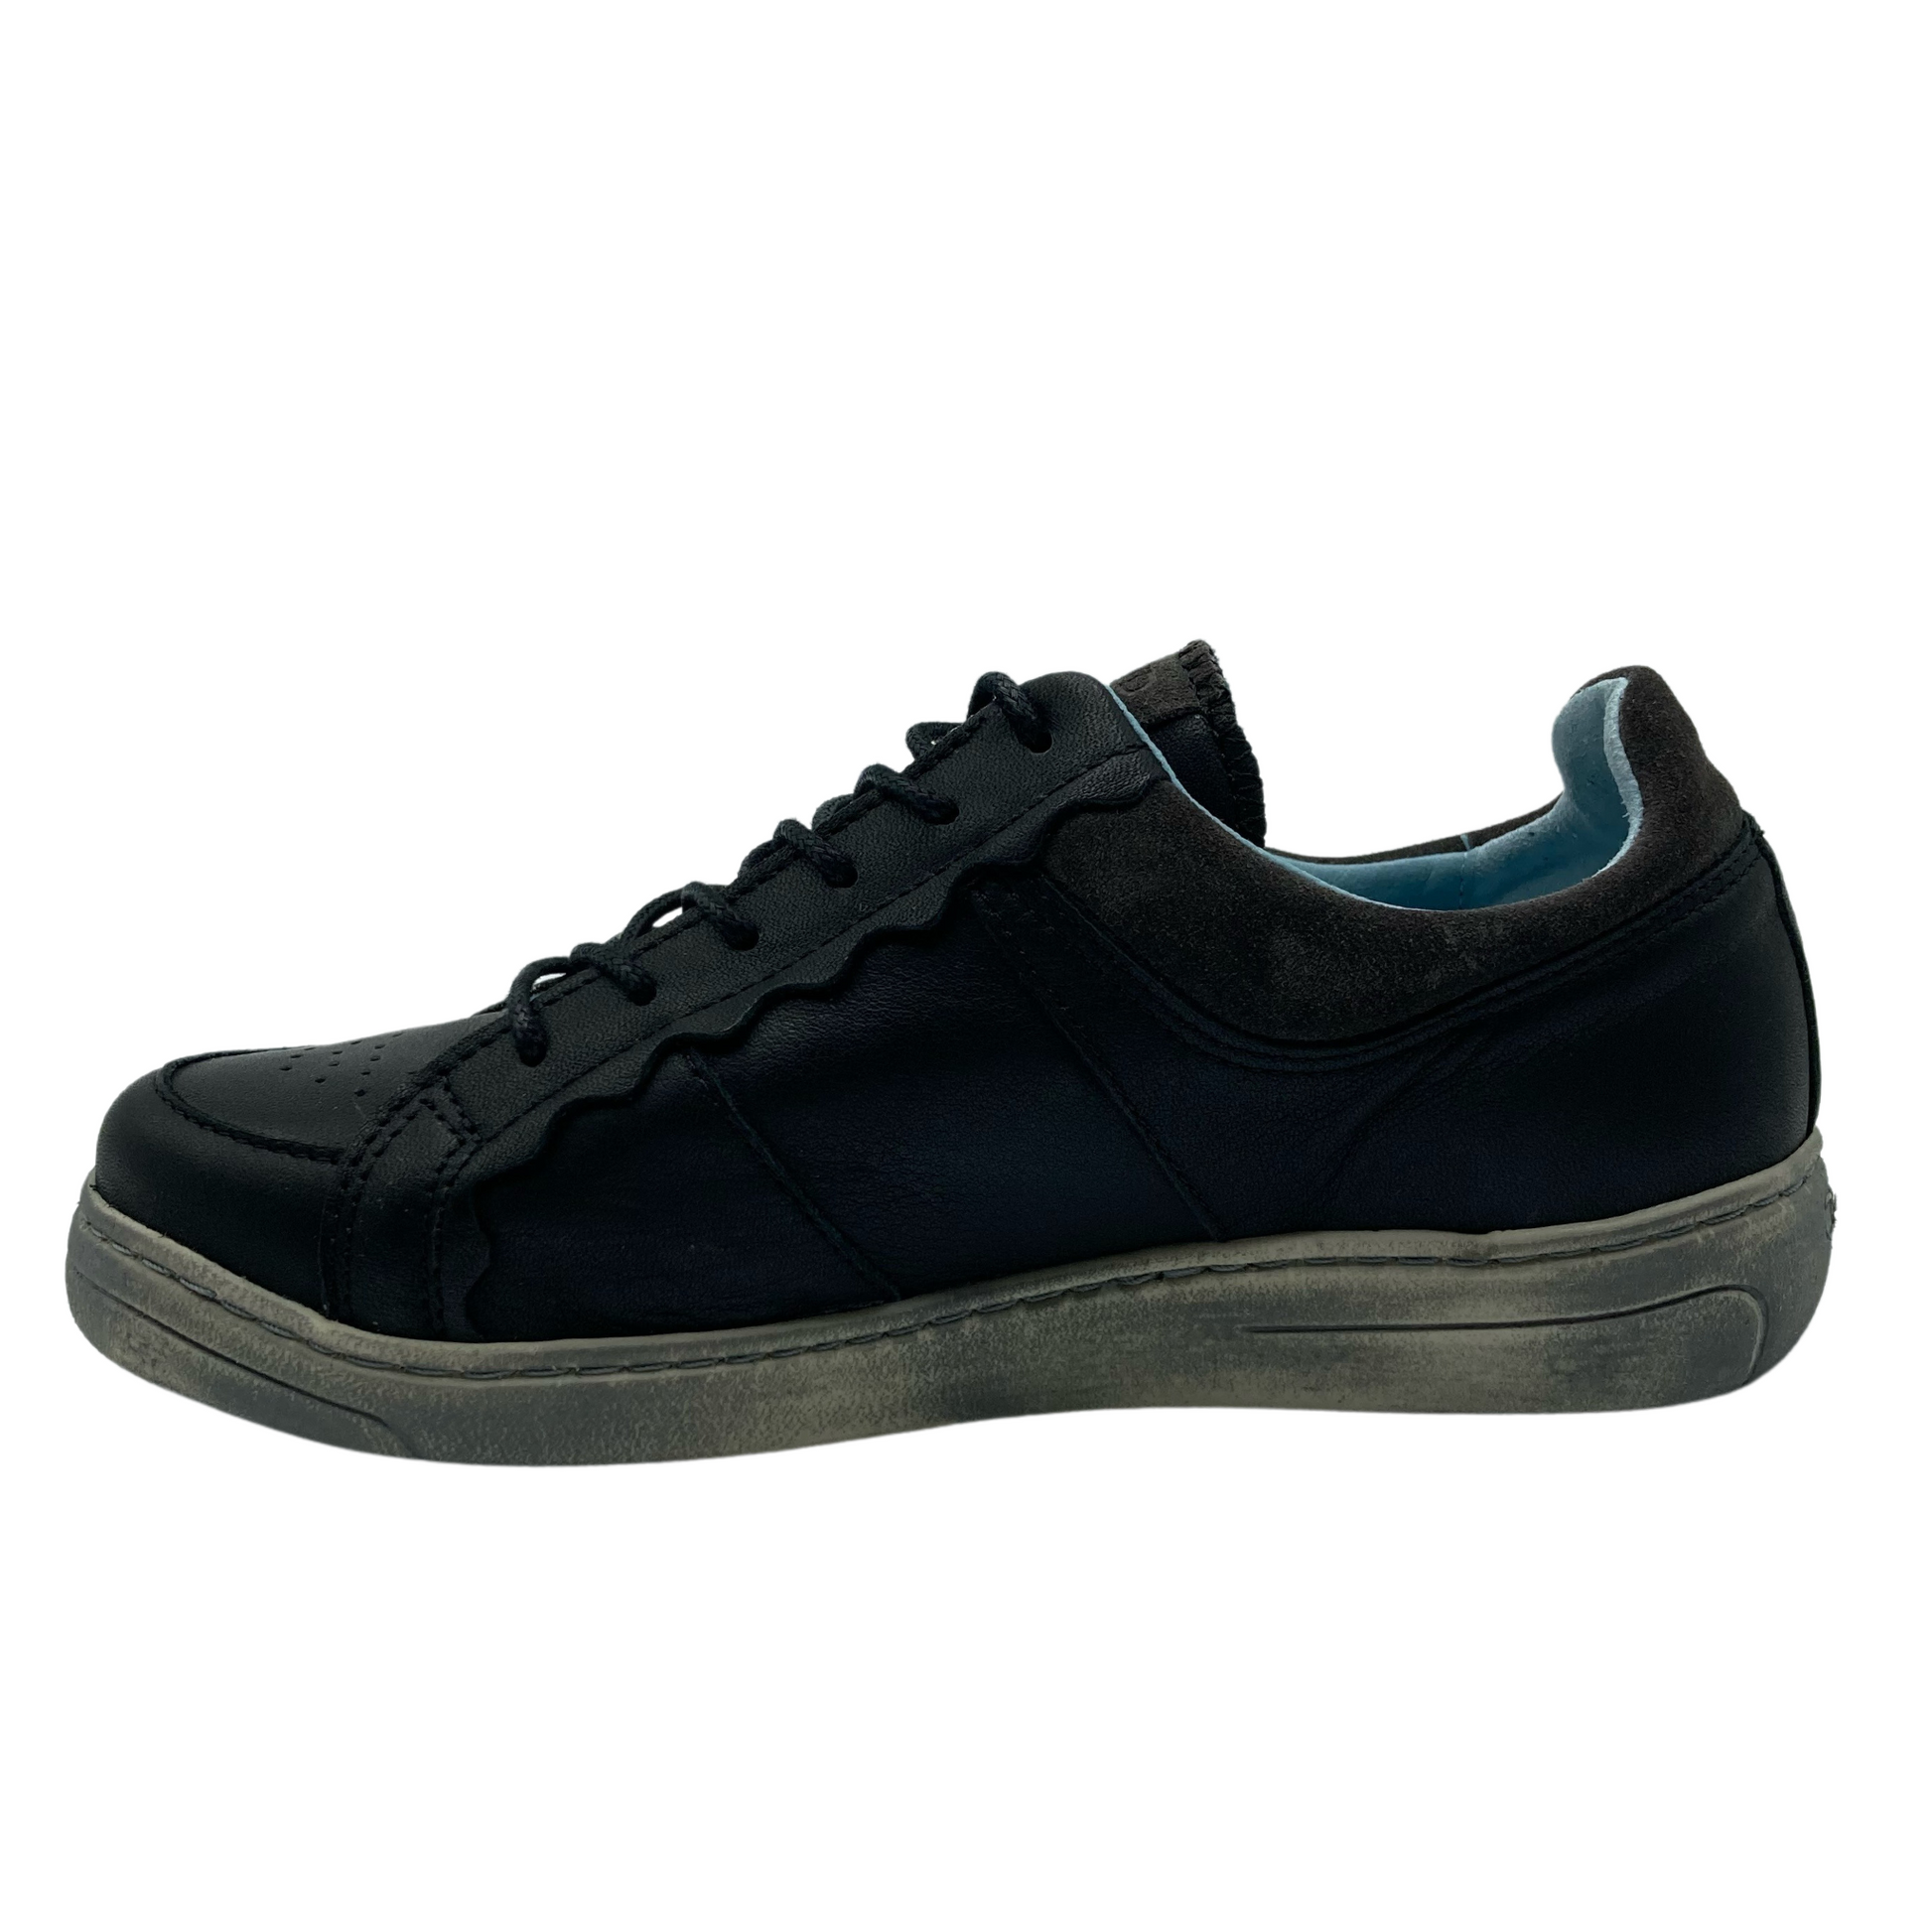 Left facing view of black leather sneaker with blue textile lining and grey rubber outsole